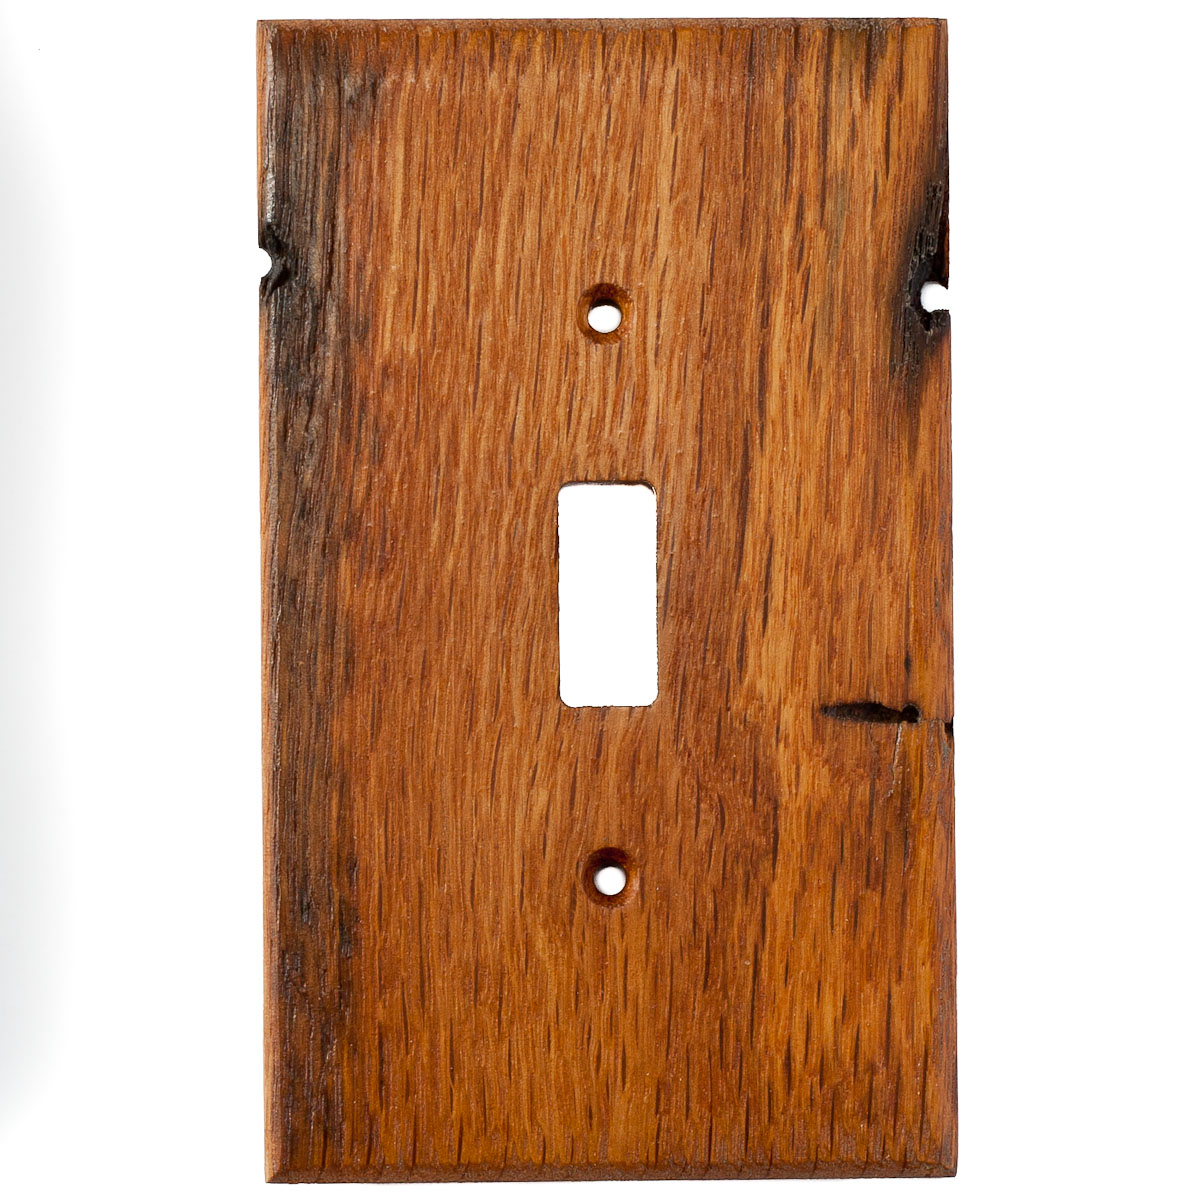 Oak Reclaimed Wood Wall Plate - 1 Gang Light Switch Cover